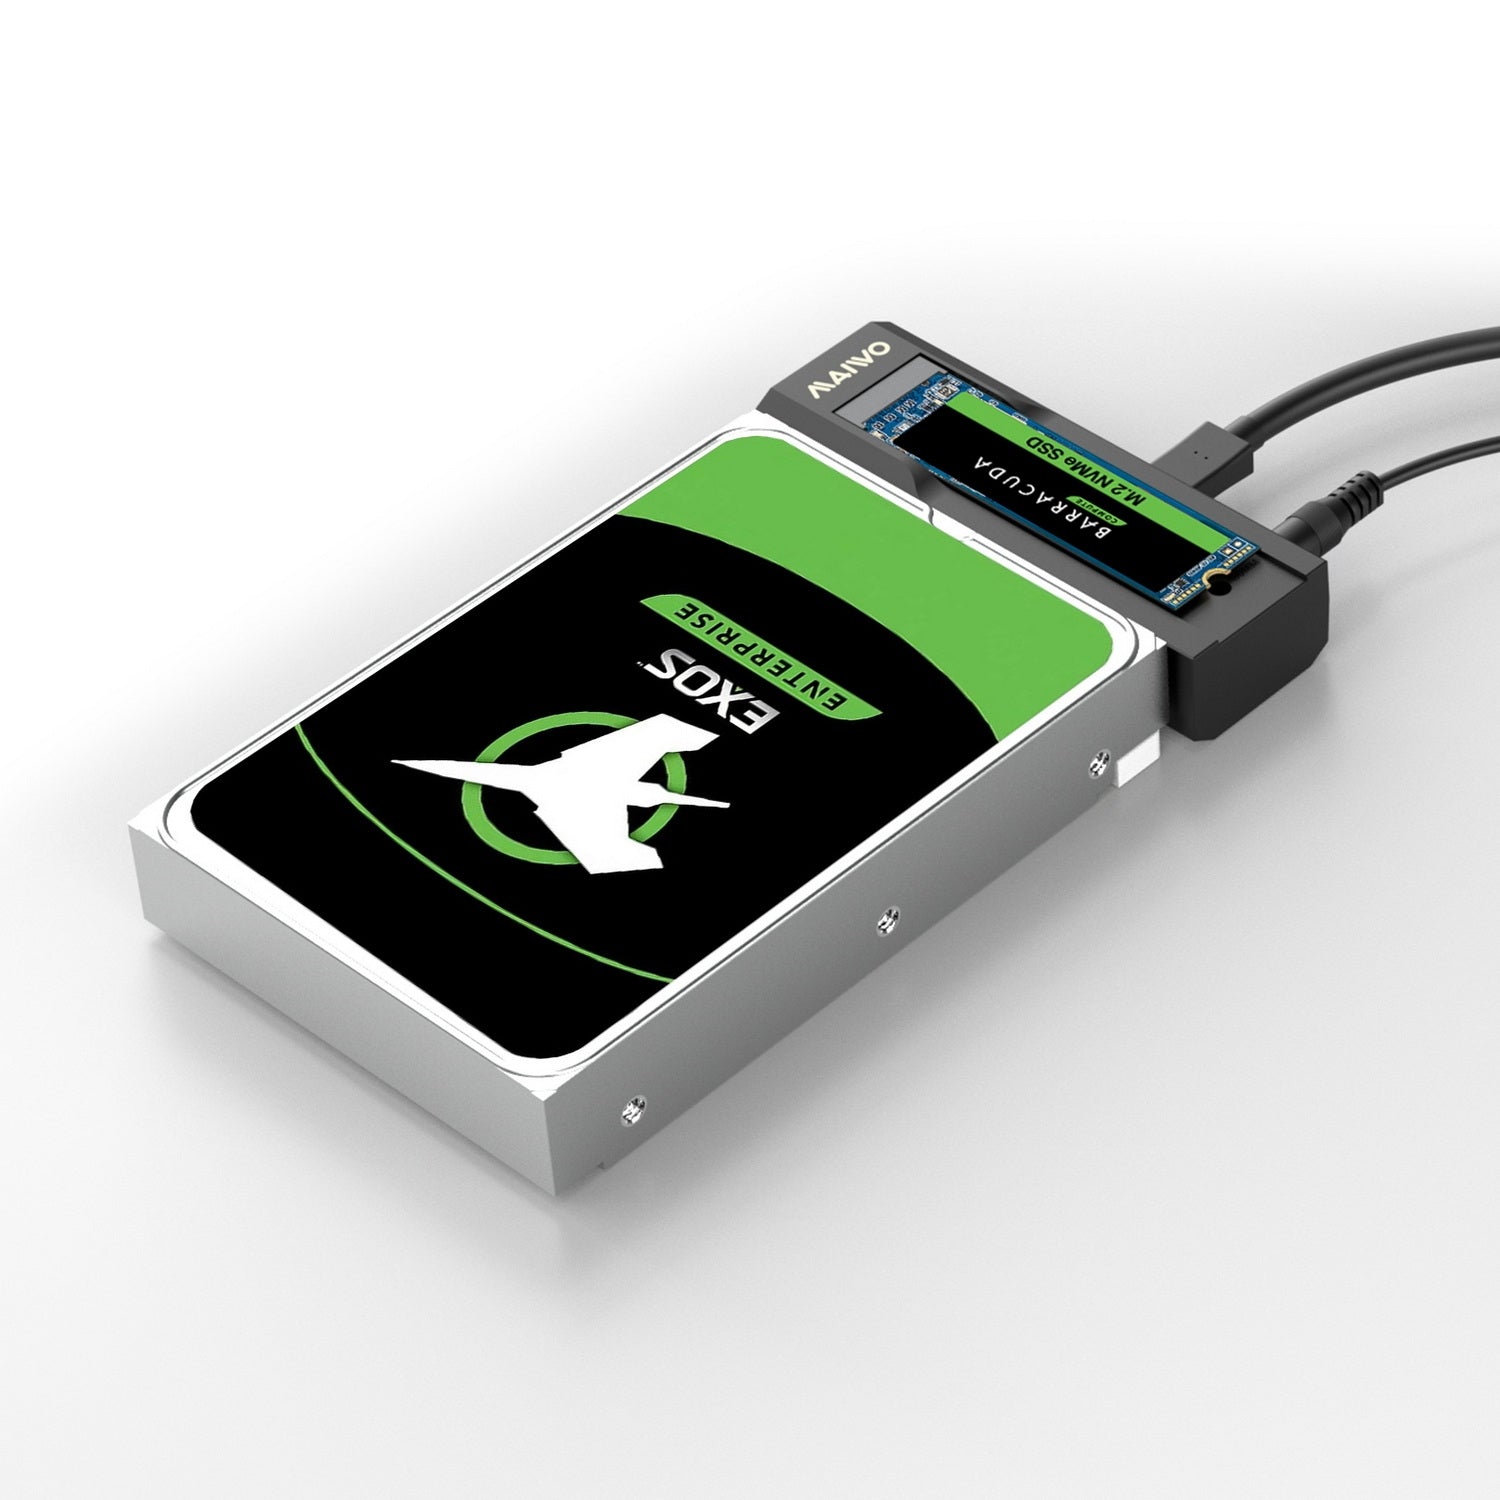 Usb To M.2 & Sata 2-In-1 Adapter: Hdd & Nvme/Sata M.2 Ssd, Usb 3.2 Gen2 10Gbps